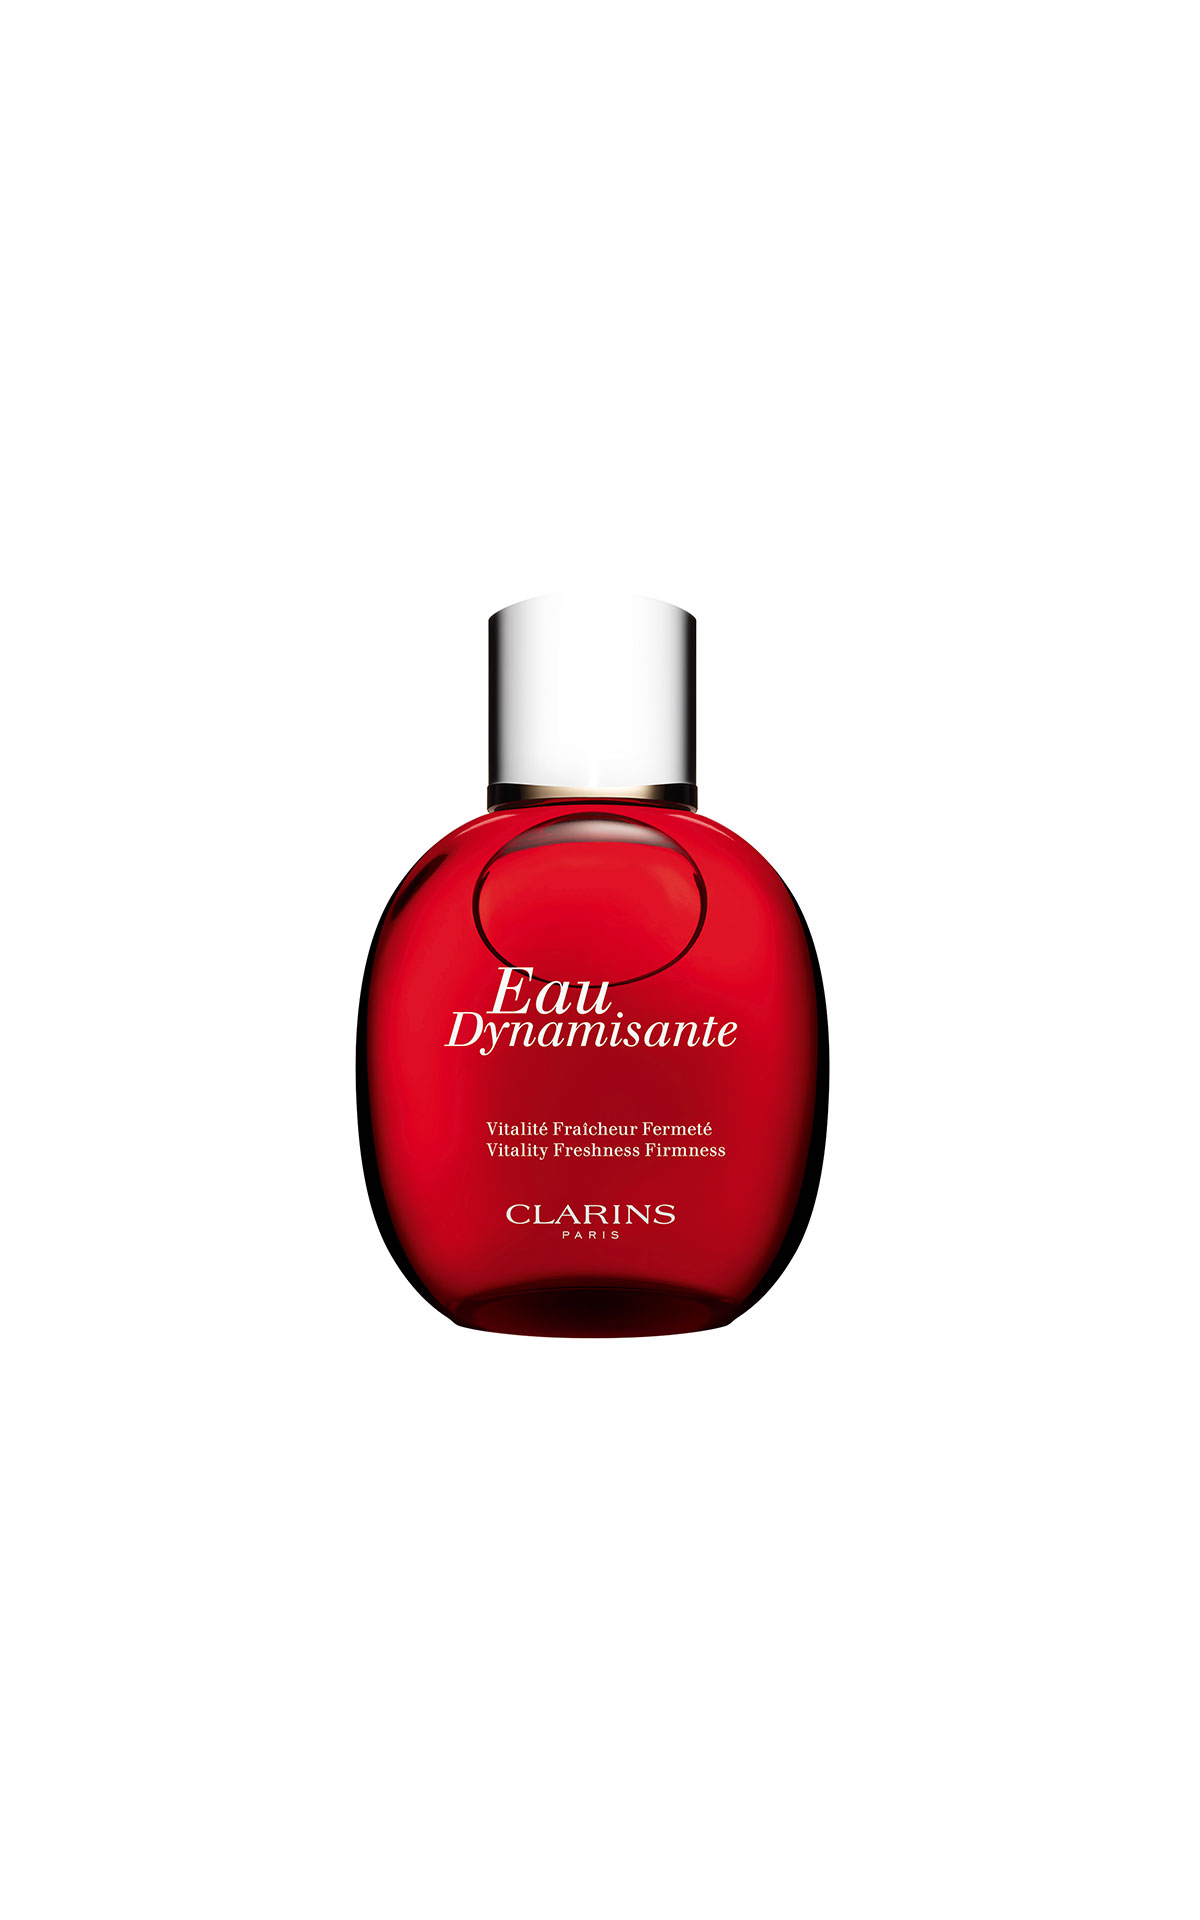 Clarins Eau dynamisante from Bicester Village